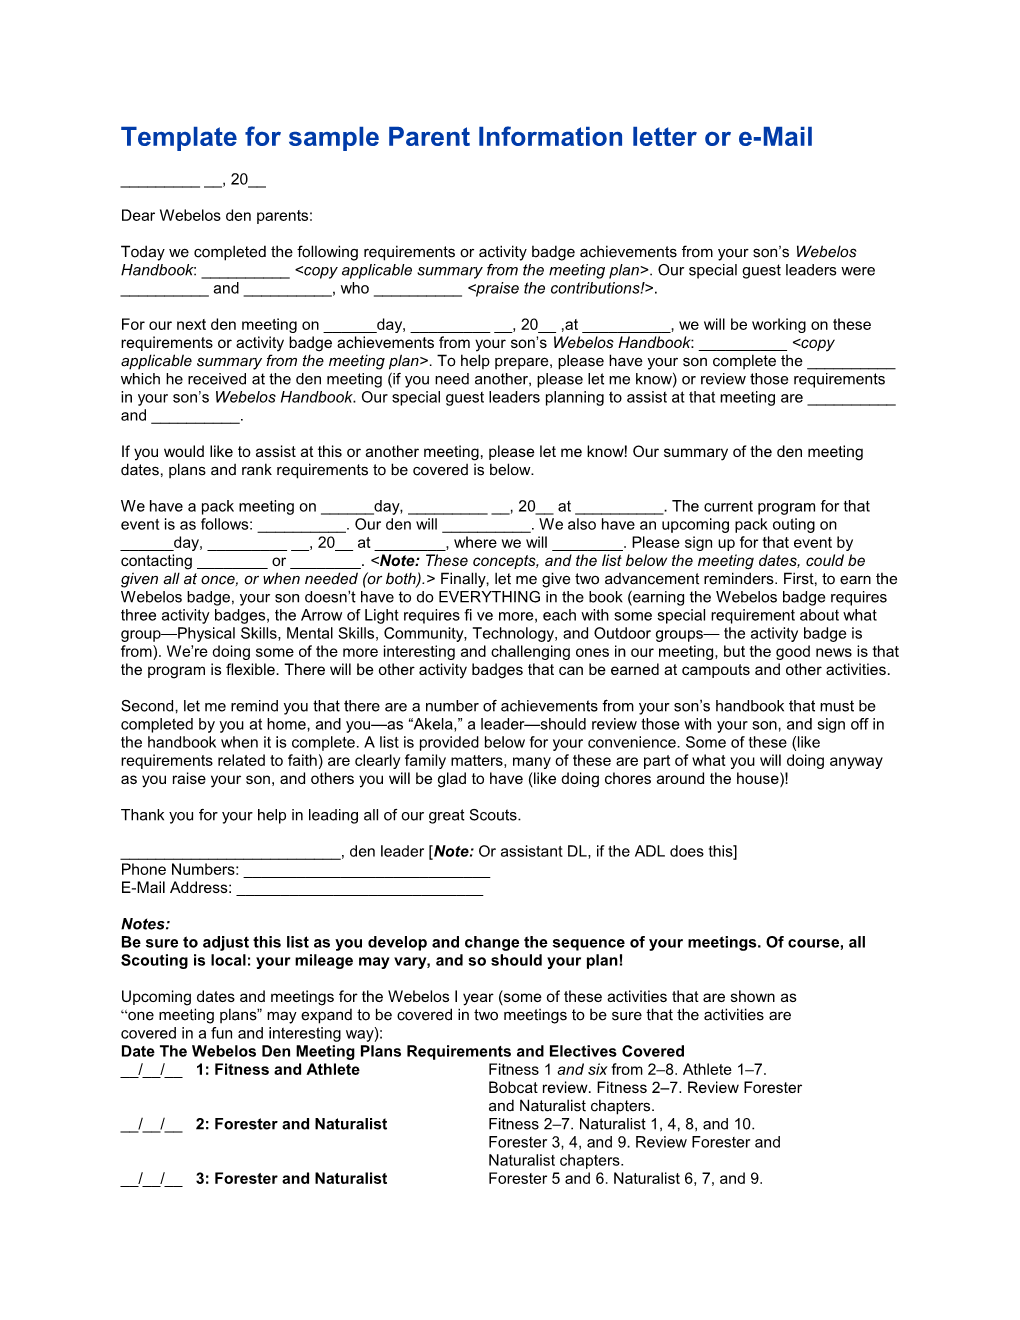 Template for Sample Parent Information Letter Or E-Mail